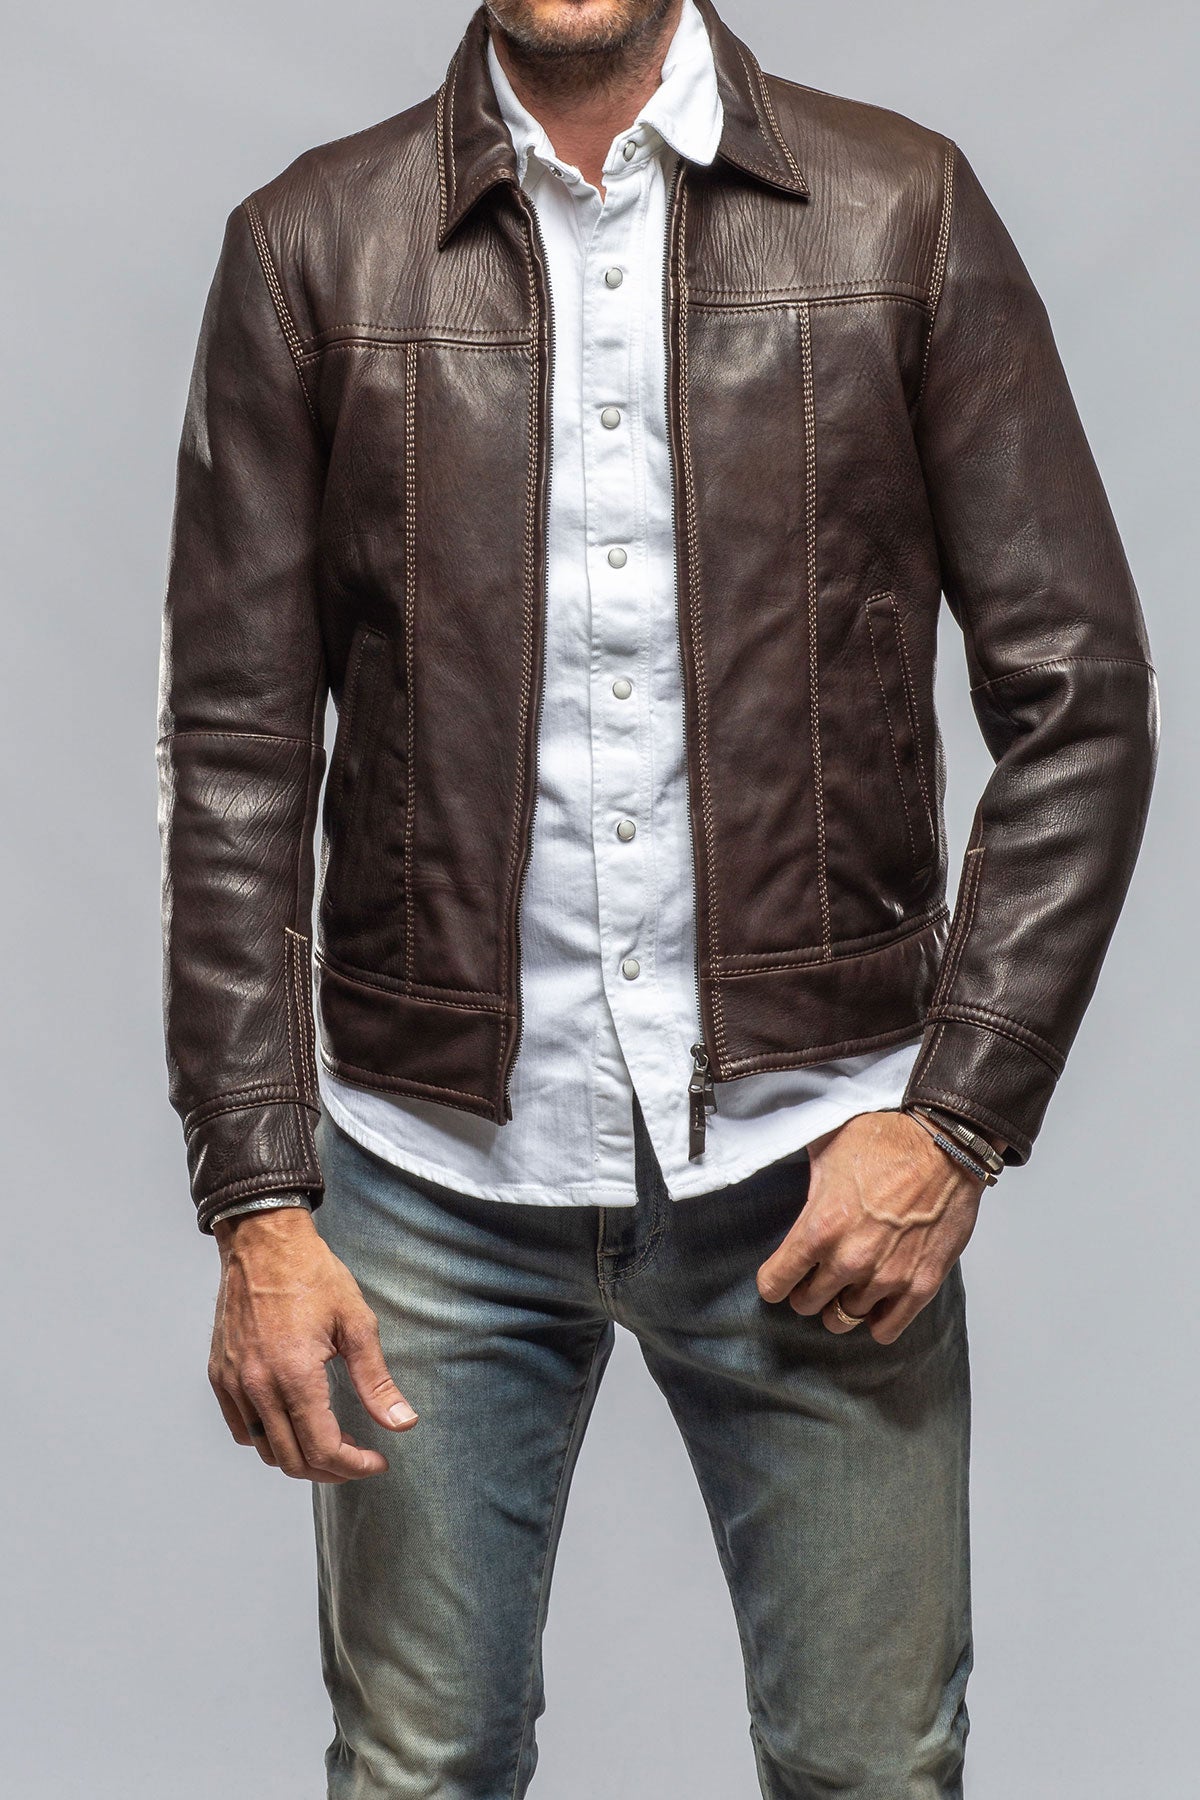 Sundance Leather Jacket | Samples - Mens - Outerwear - Leather | Gimo's